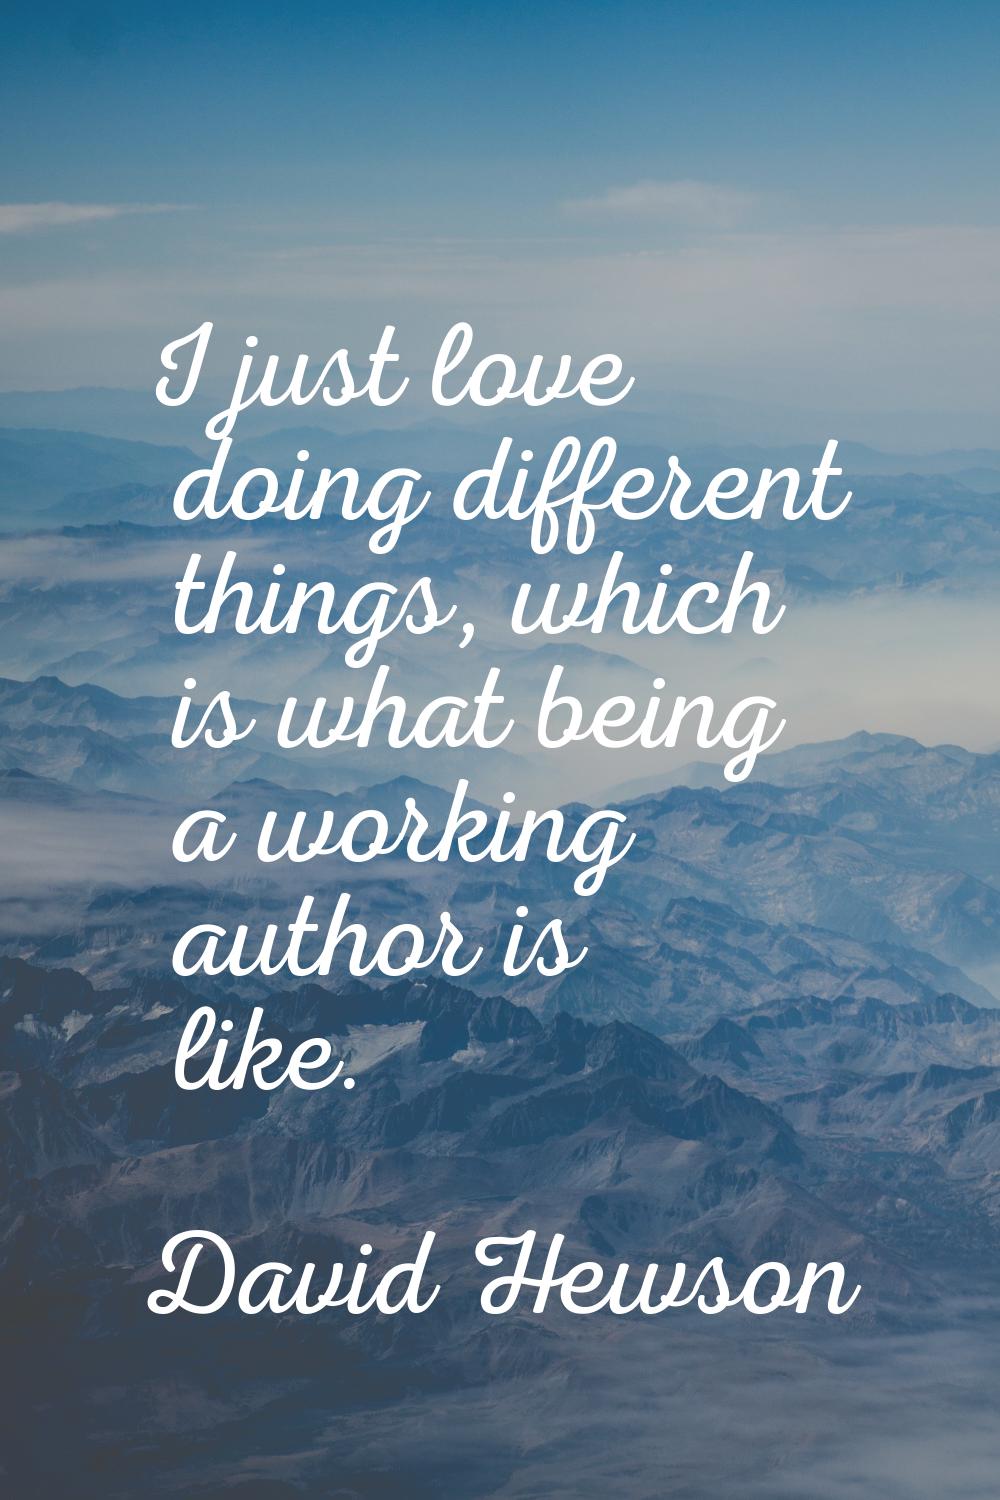 I just love doing different things, which is what being a working author is like.